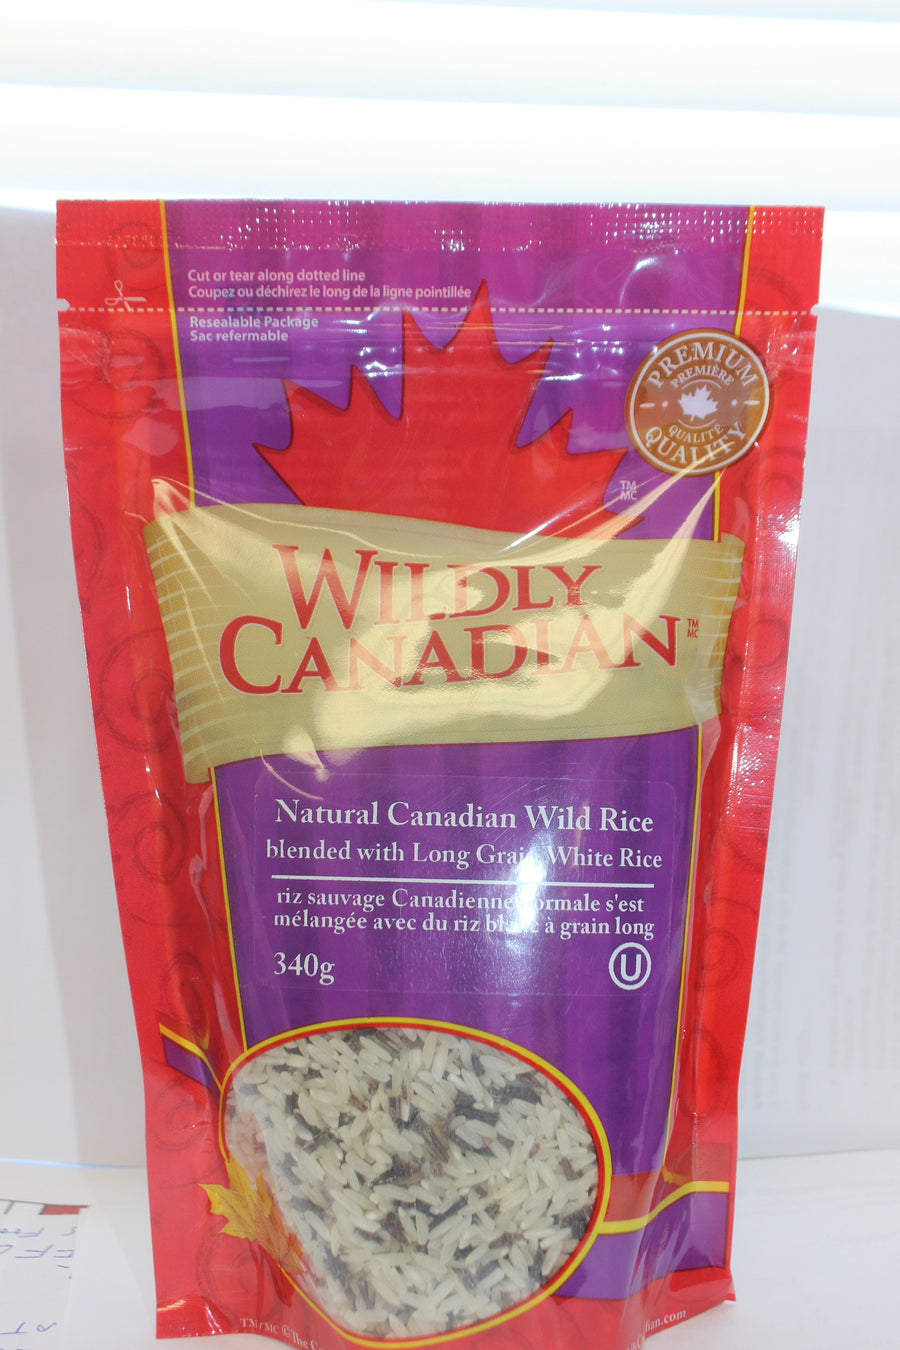 Natural Canadian Wild Rice Blended with Long Grain White Rice - The Canadian Wild Rice Mercantile Ltd.